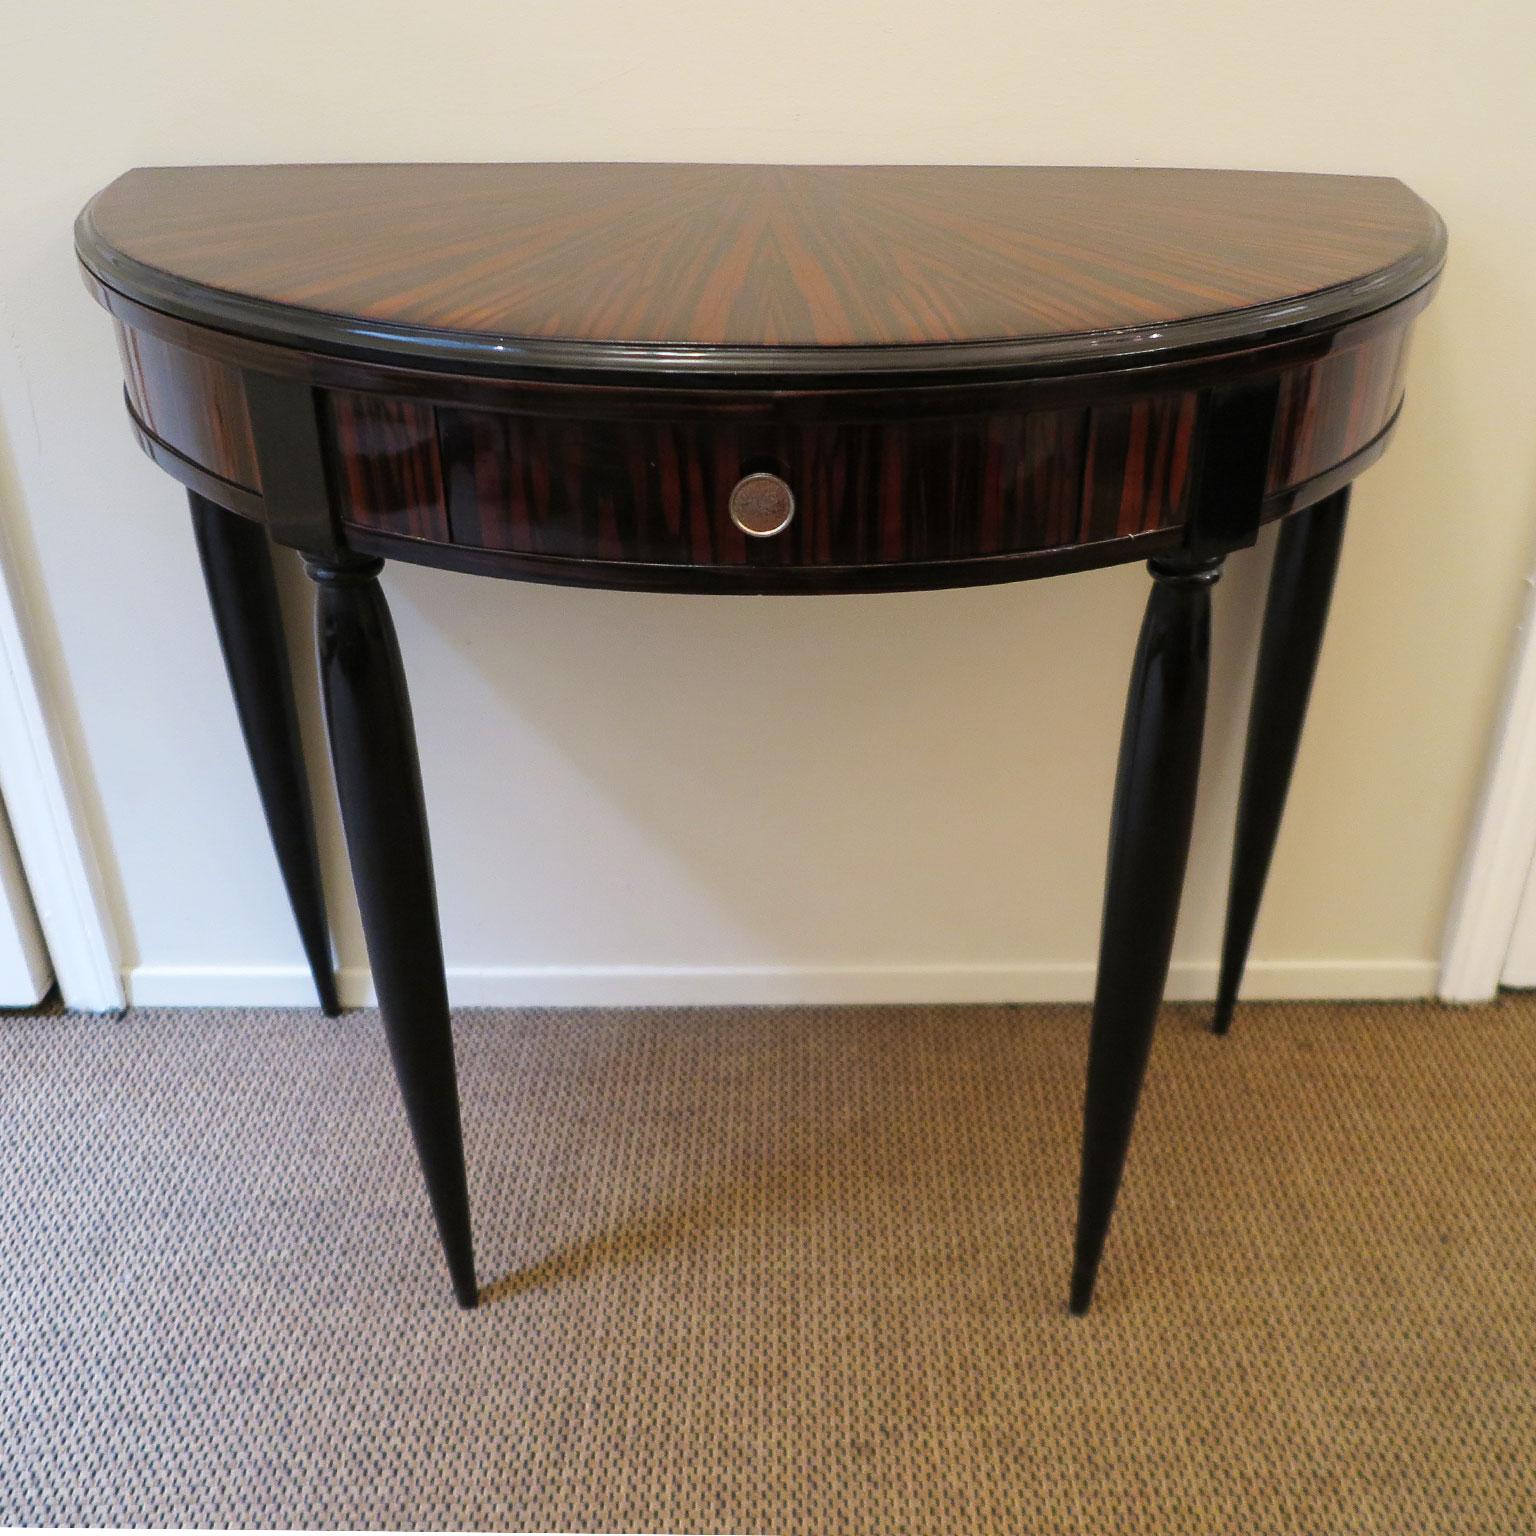 Small demilune console with Macassar ebony with a starburst pattern on top. Black lacquer rounded, tapered legs and details. Small curved centre drawer with silver knob.